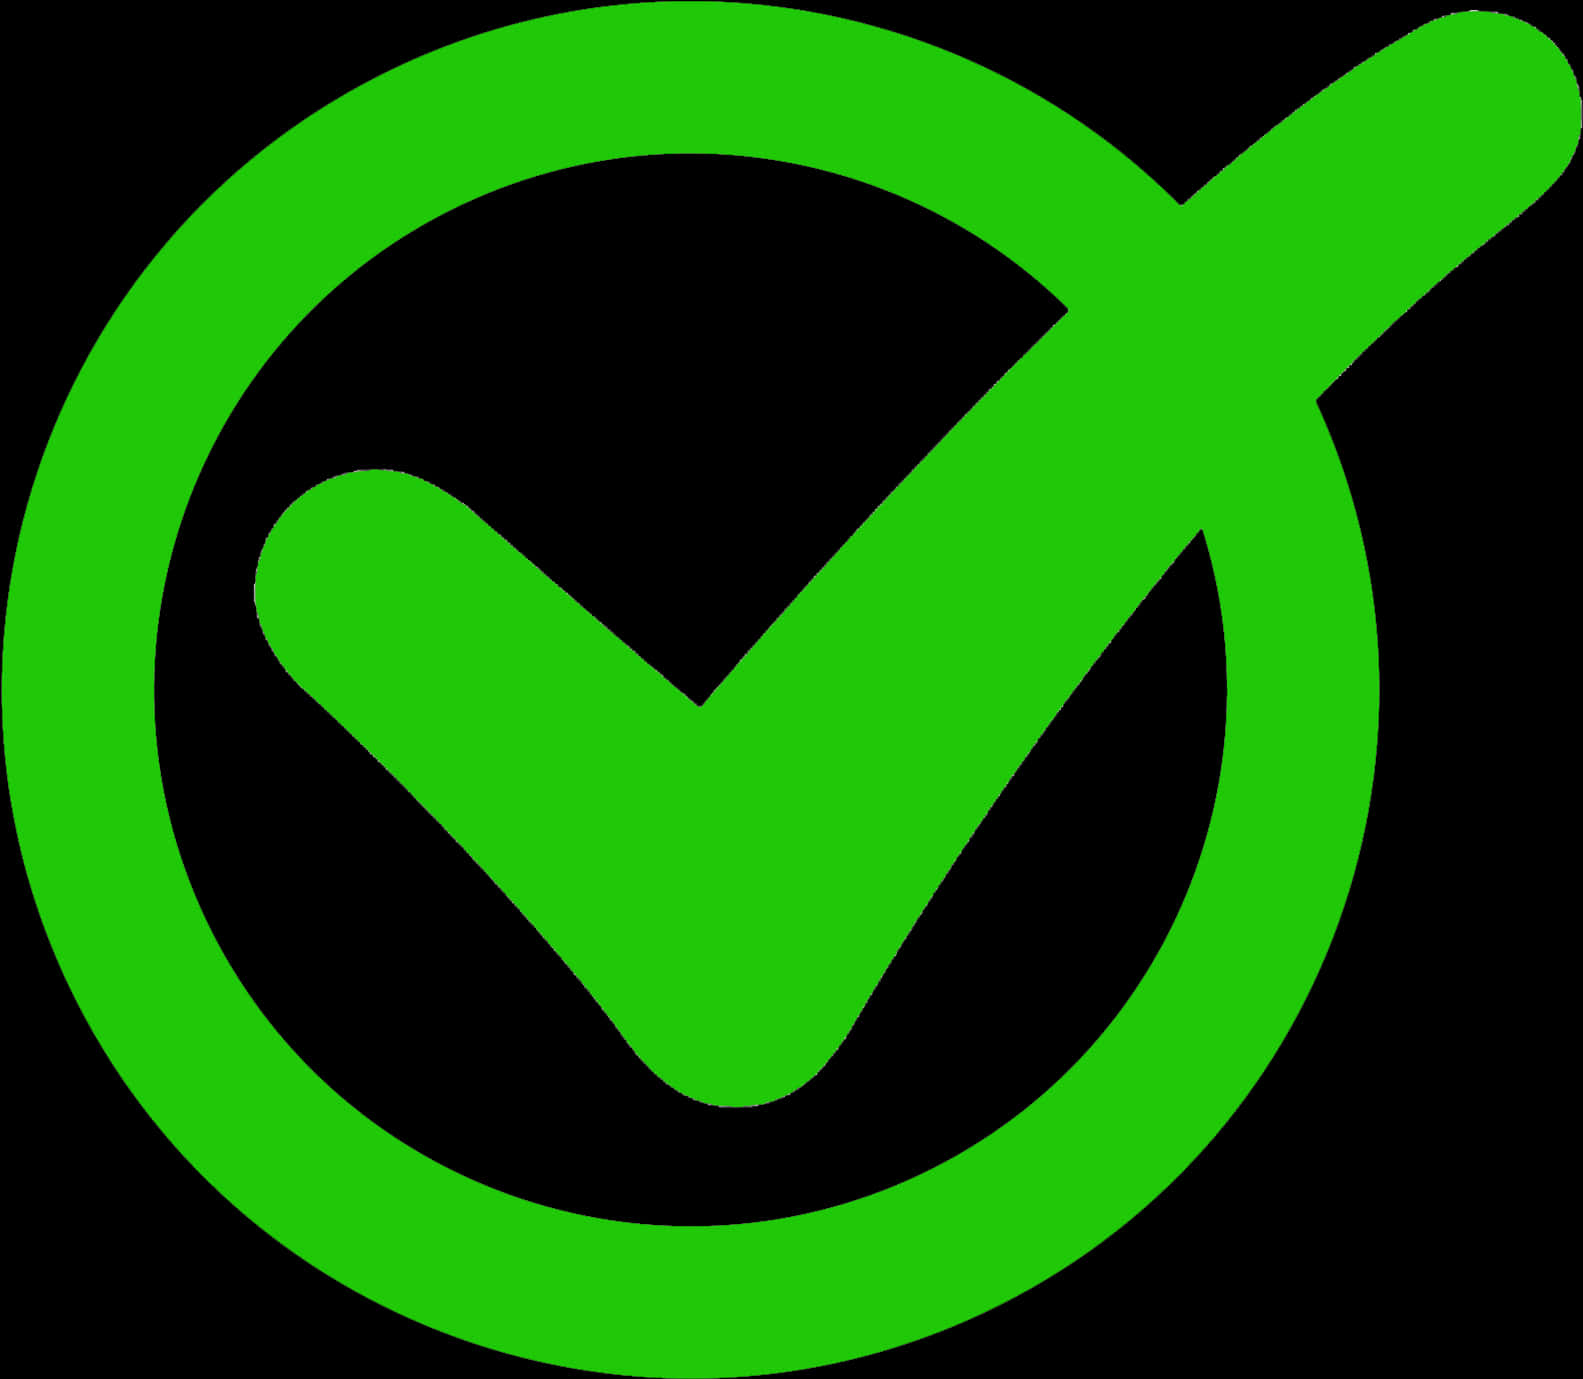 Green Check Mark Graphic PNG image